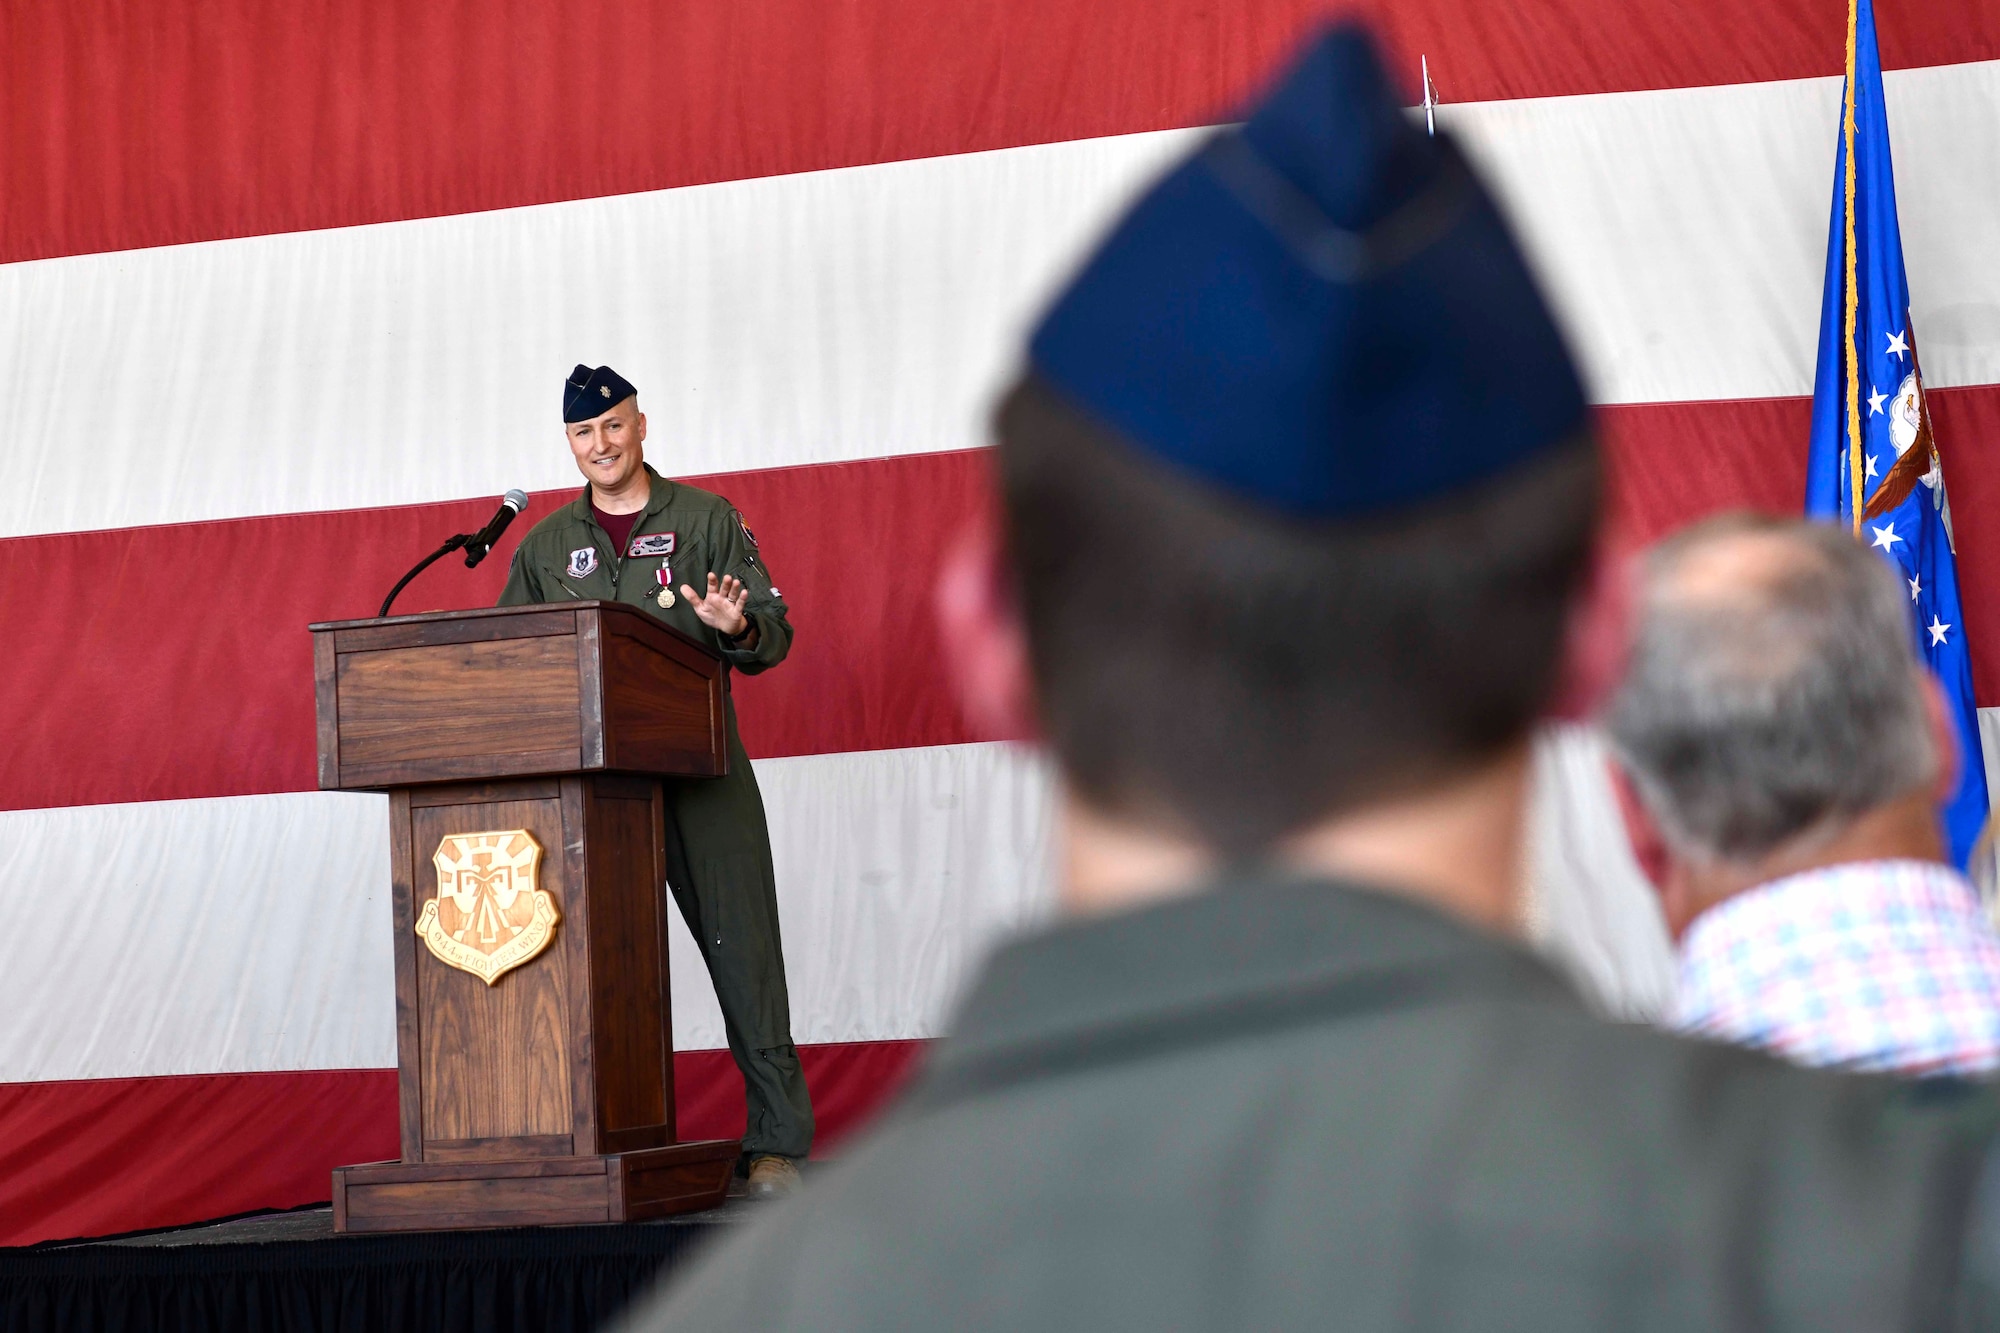 The 52nd Fighter Squadron celebrated a major milestone by holding their first ever F-35 change of command ceremony since being reactivated earlier this year at Luke Air Force Base, Arizona, October 29, 2021.